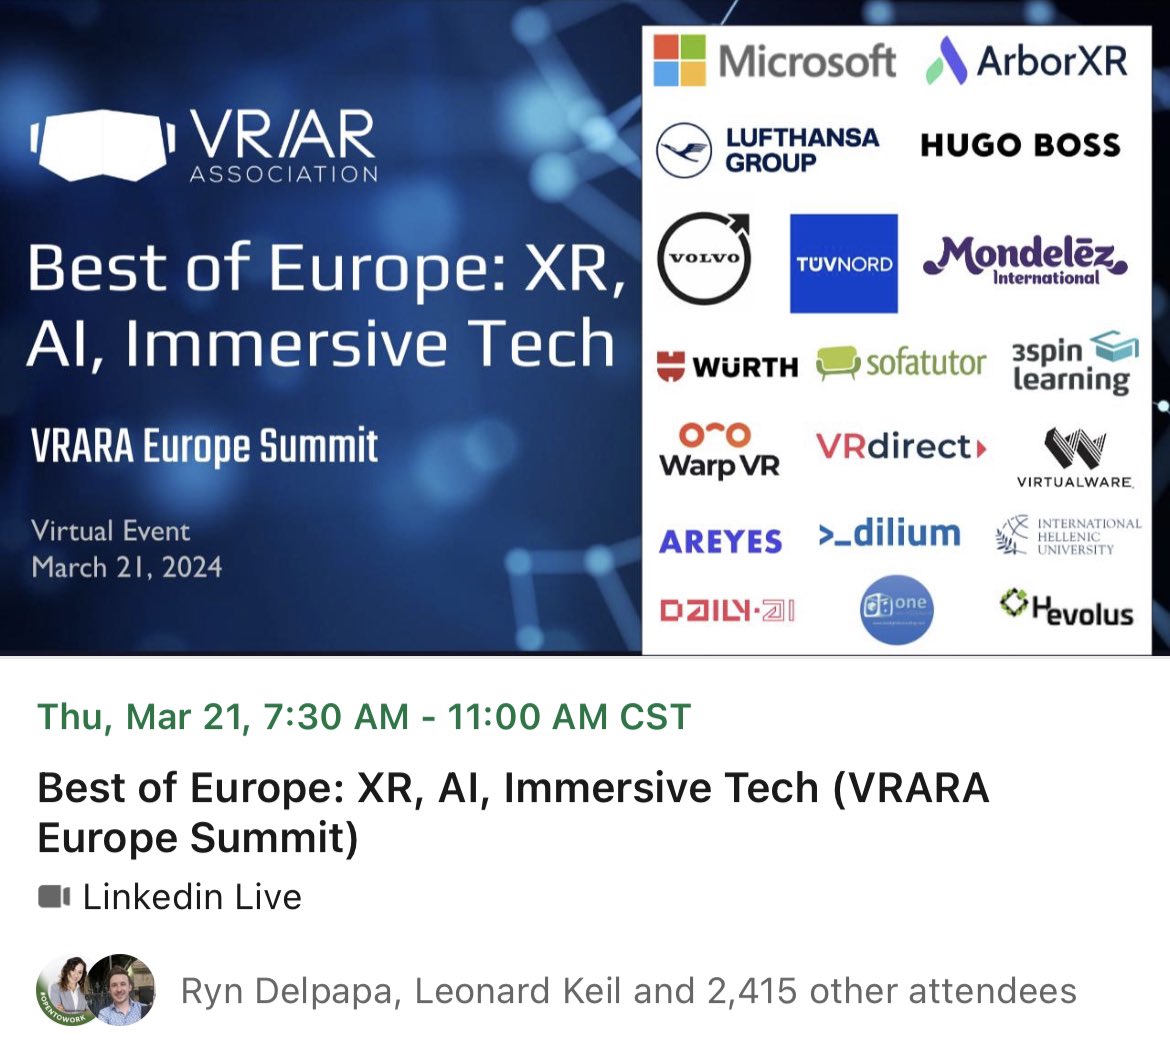 🔥2400+ already registered for our Best of Europe: XR, AI, Immersive Tech lnkd.in/dfry2sng on March 21! Hear from Microsoft, Lufthansa, Volvo, Hugo Boss, Mondelēz, WURTH, 30+ speakers! Apple Vision Pro, Microsoft Mesh, and so much more🤗 #spatialcomputing #euro #visionos